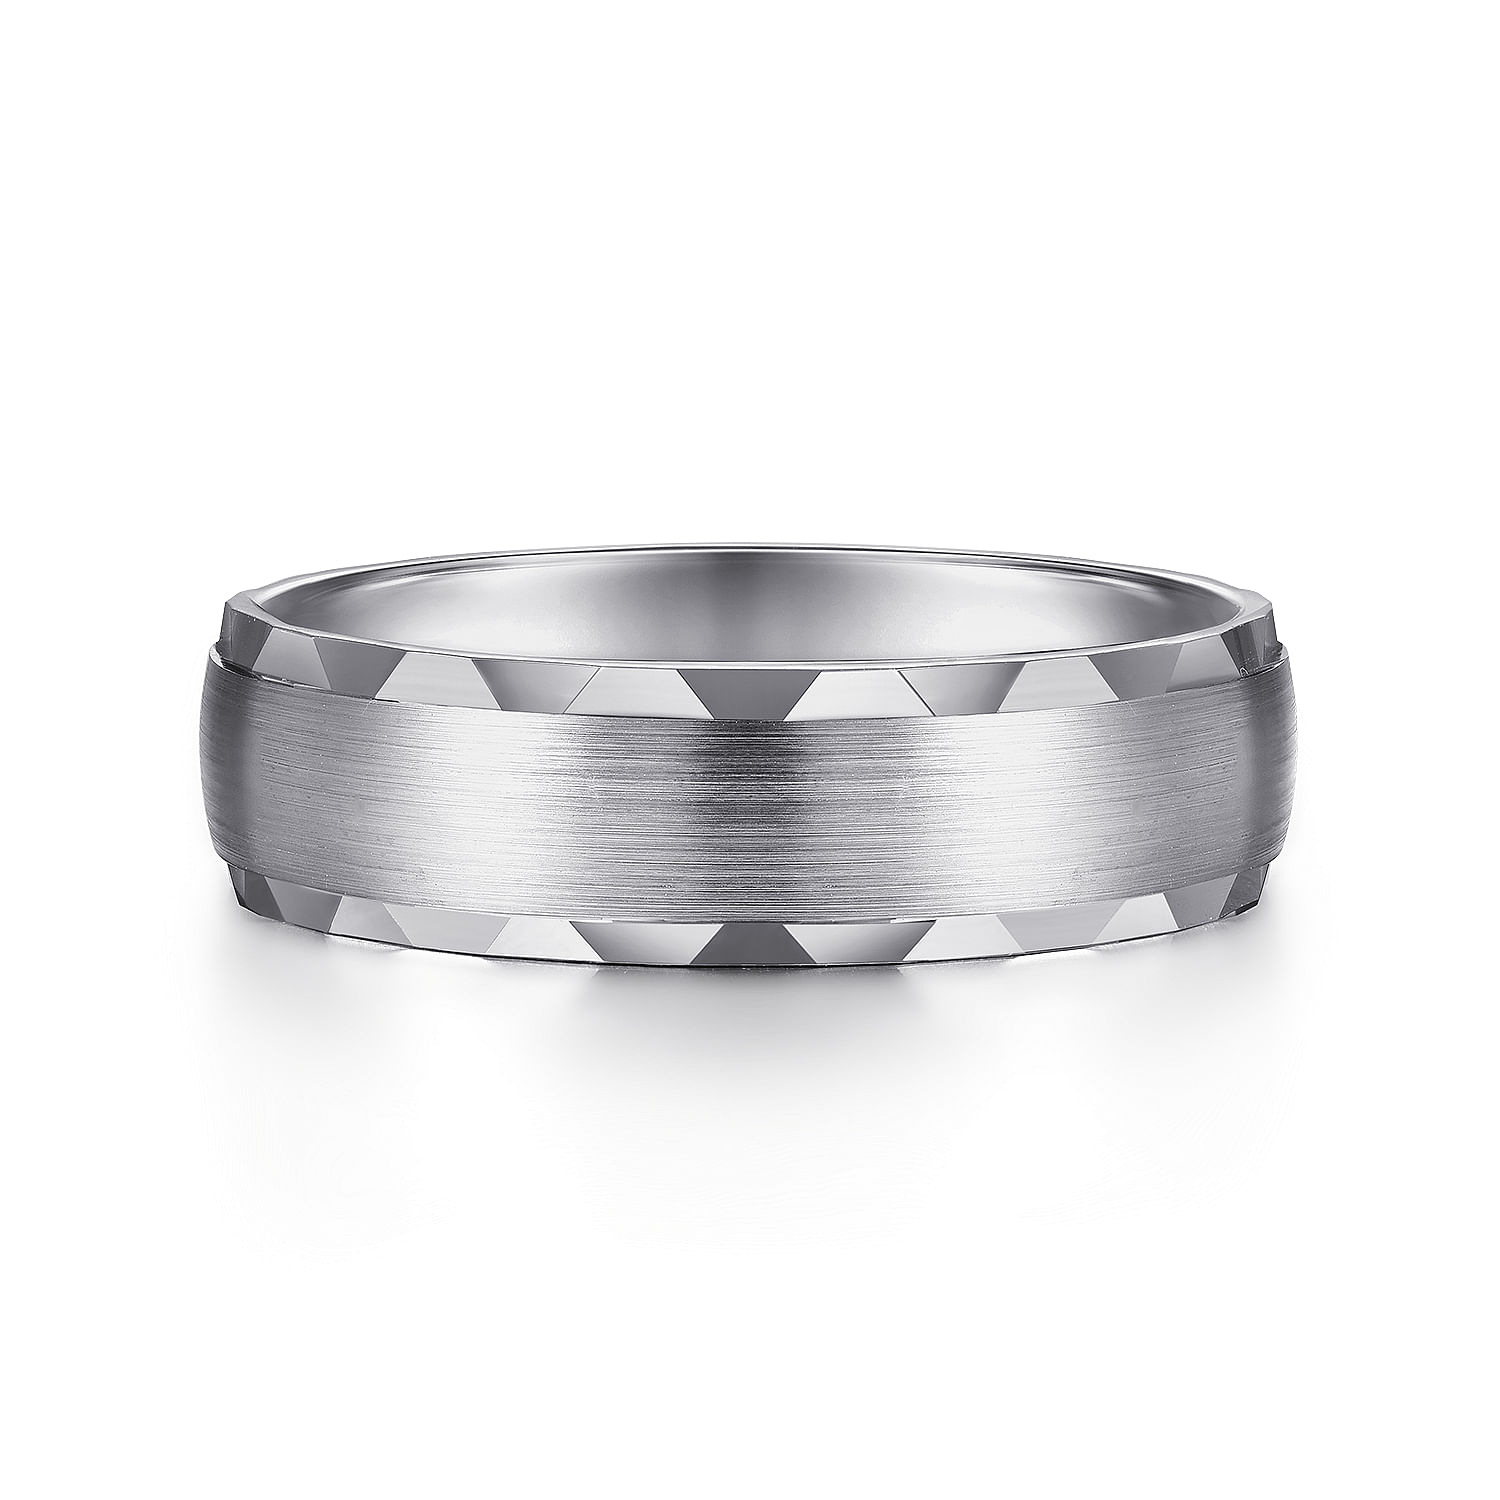 Julian---14K-White-Gold-6mm---Satin-Finish-Men's-Wedding-Band-with-Carved-Edge1